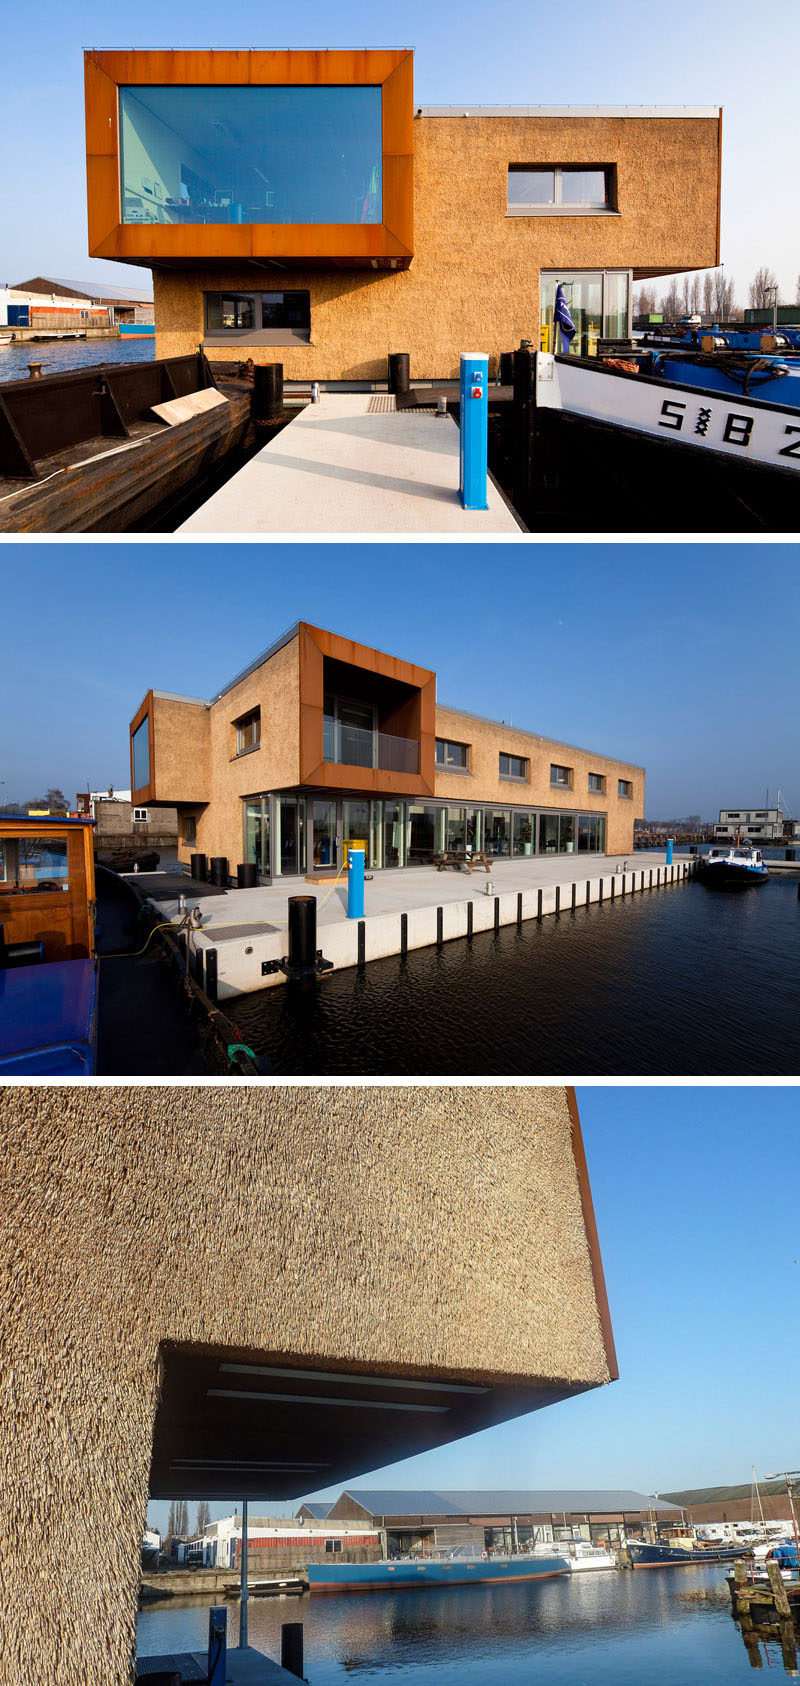 12 Examples Of Modern Houses And Buildings That Have A Thatched Roof // This floating office building for canal cleaners in Amsterdam is covered with both steel and trimmed thatch that protect it from the elements.